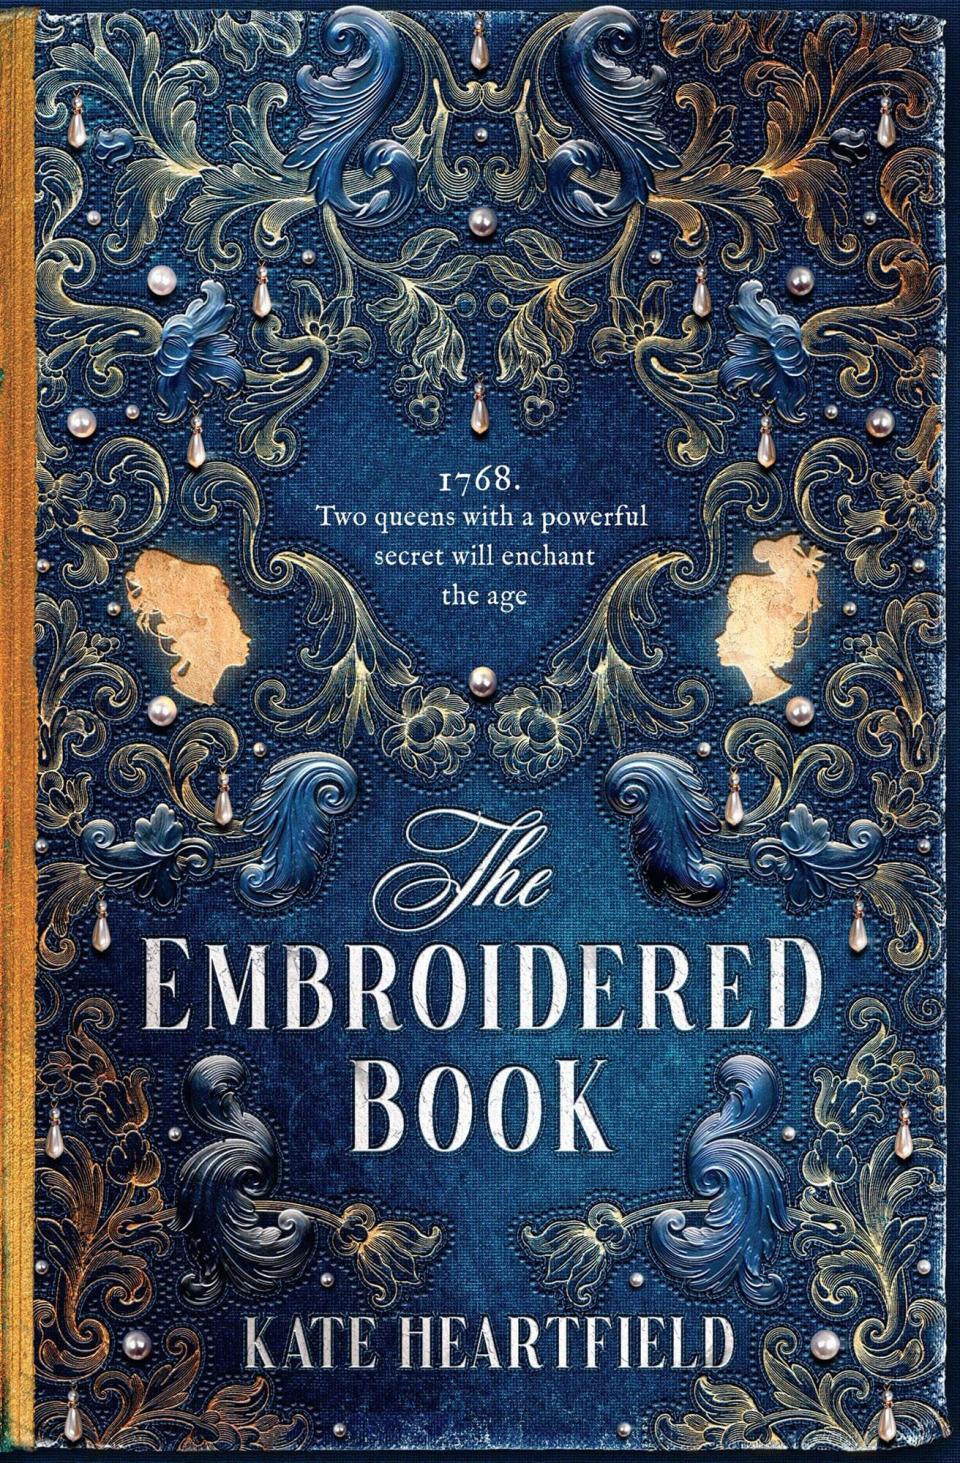 The Embroidered Book by Kate Hartfield